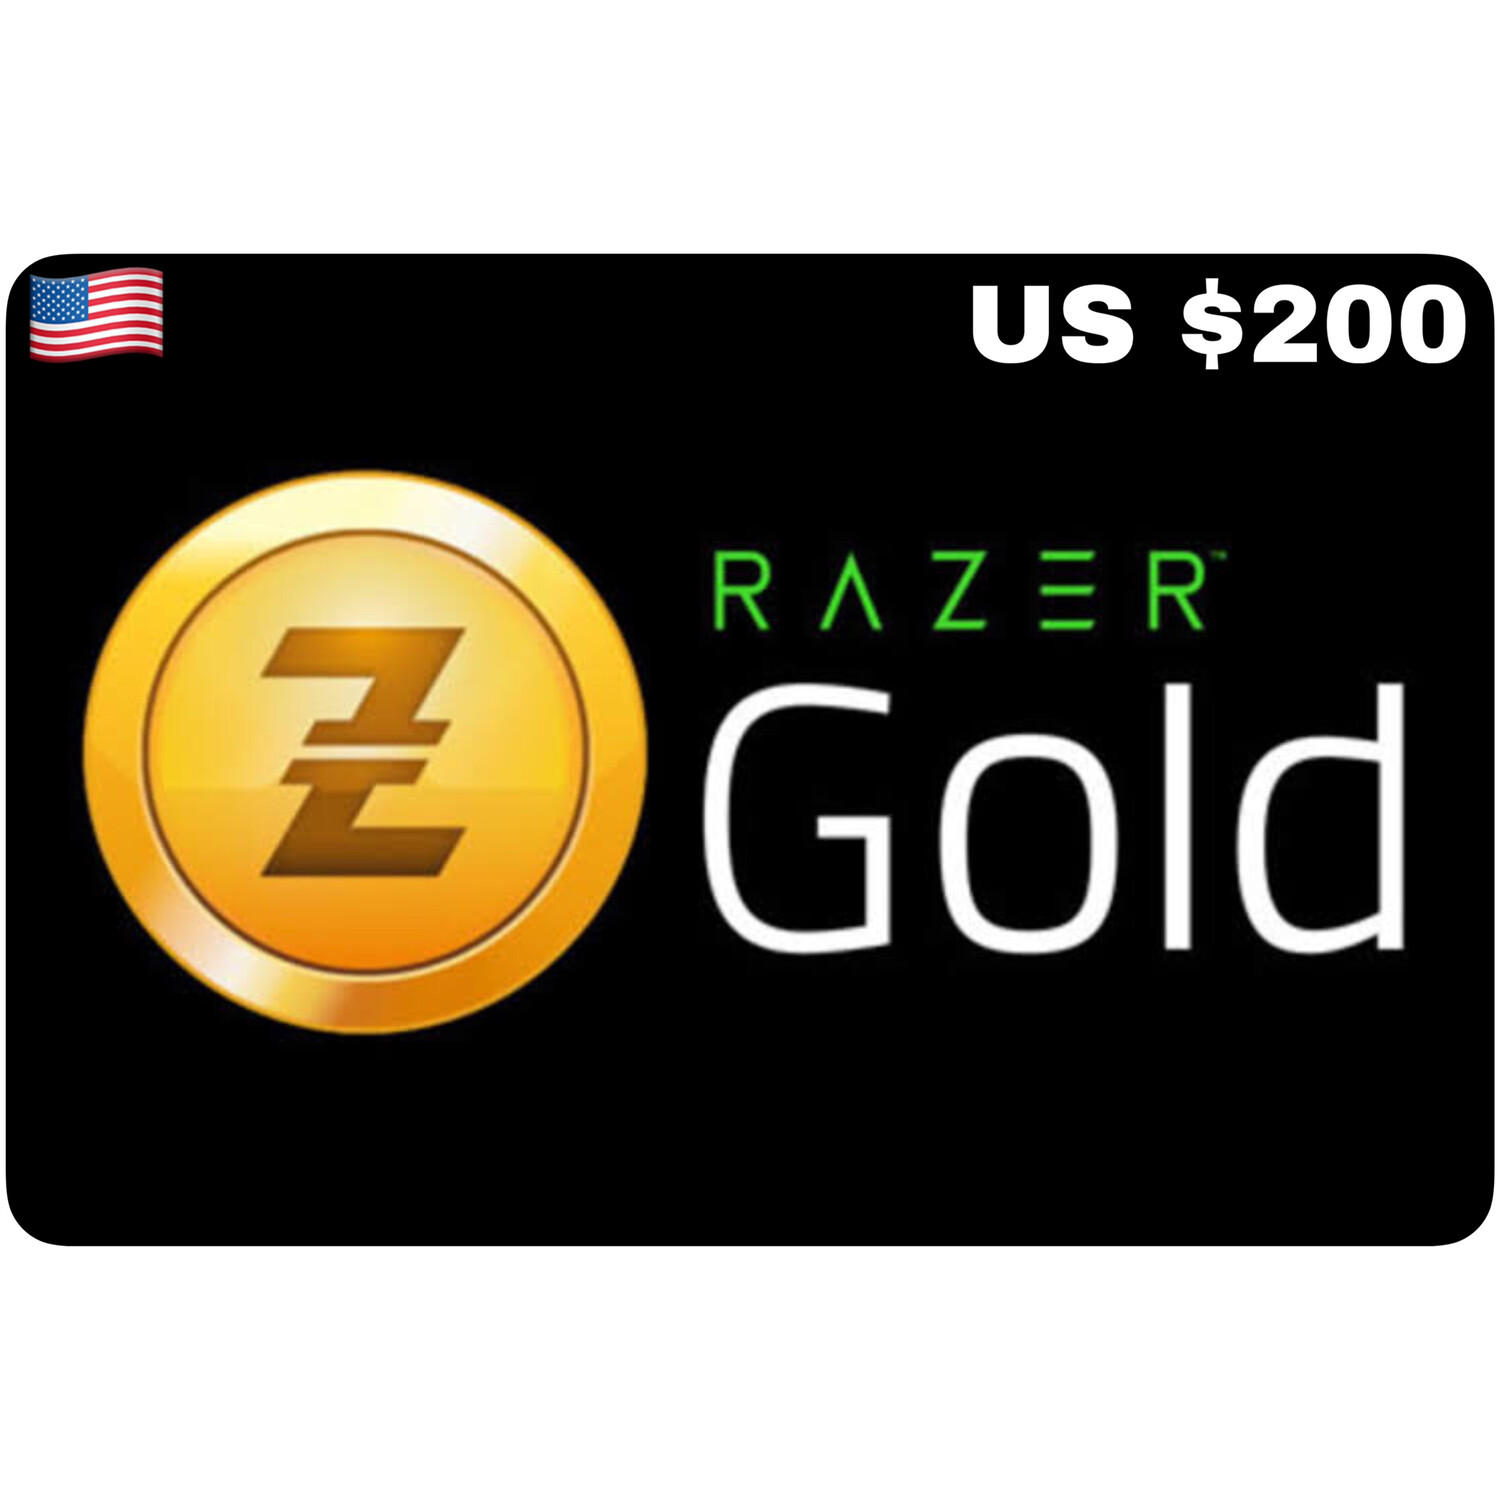 Razer Gold Pin US USD $200 With Serial Number